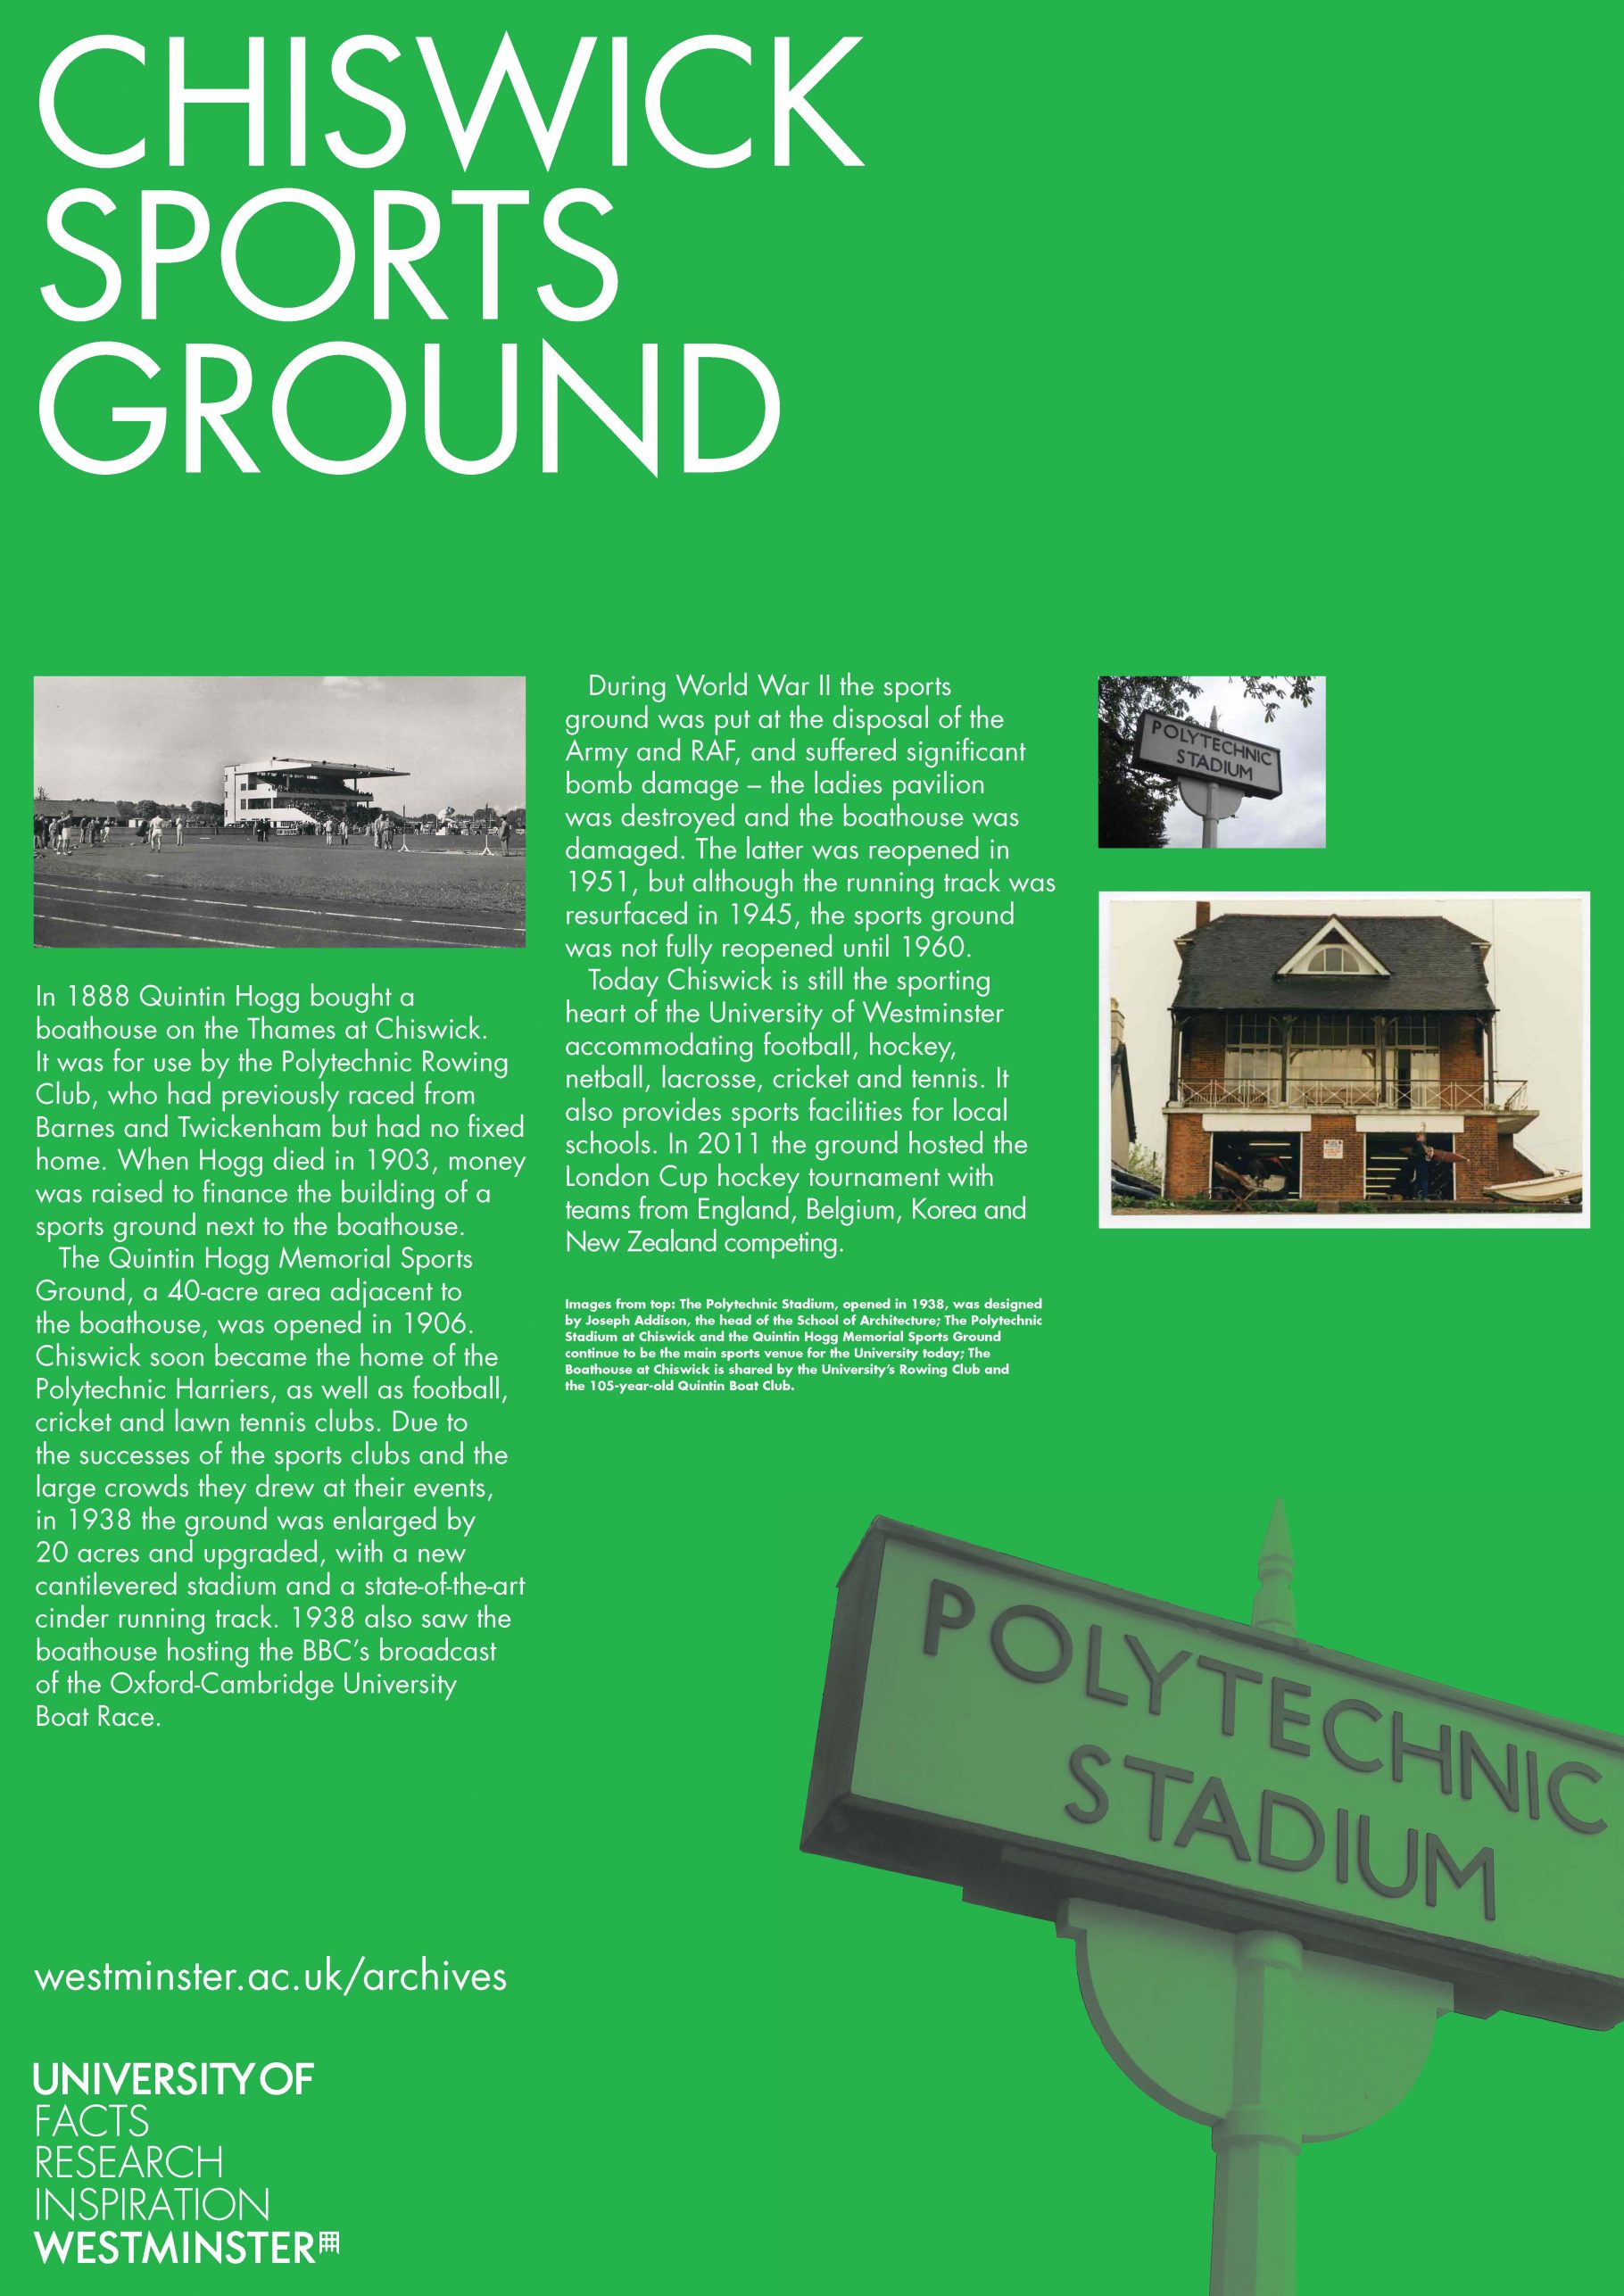 information poster on Chiswick Sports Ground